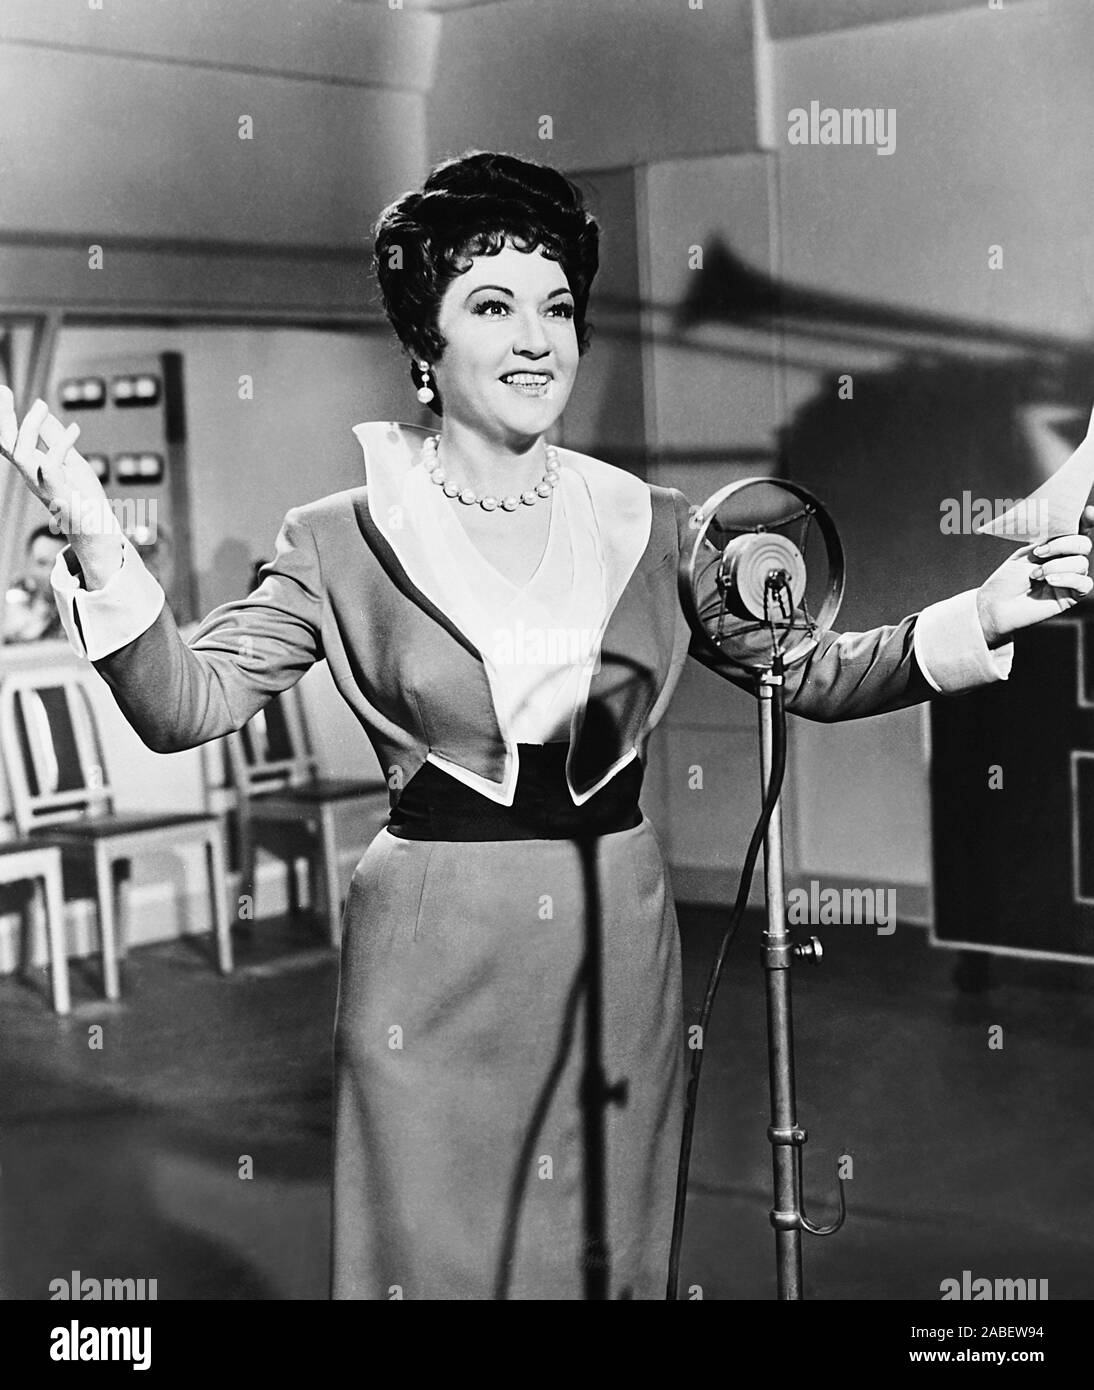 THERE'S NO BUSINESS LIKE SHOW BUSINESS, Ethel Merman, 1954, TM & Copyright © 20th Century Fox Film Corp./courtesy Everett Collection Stock Photo